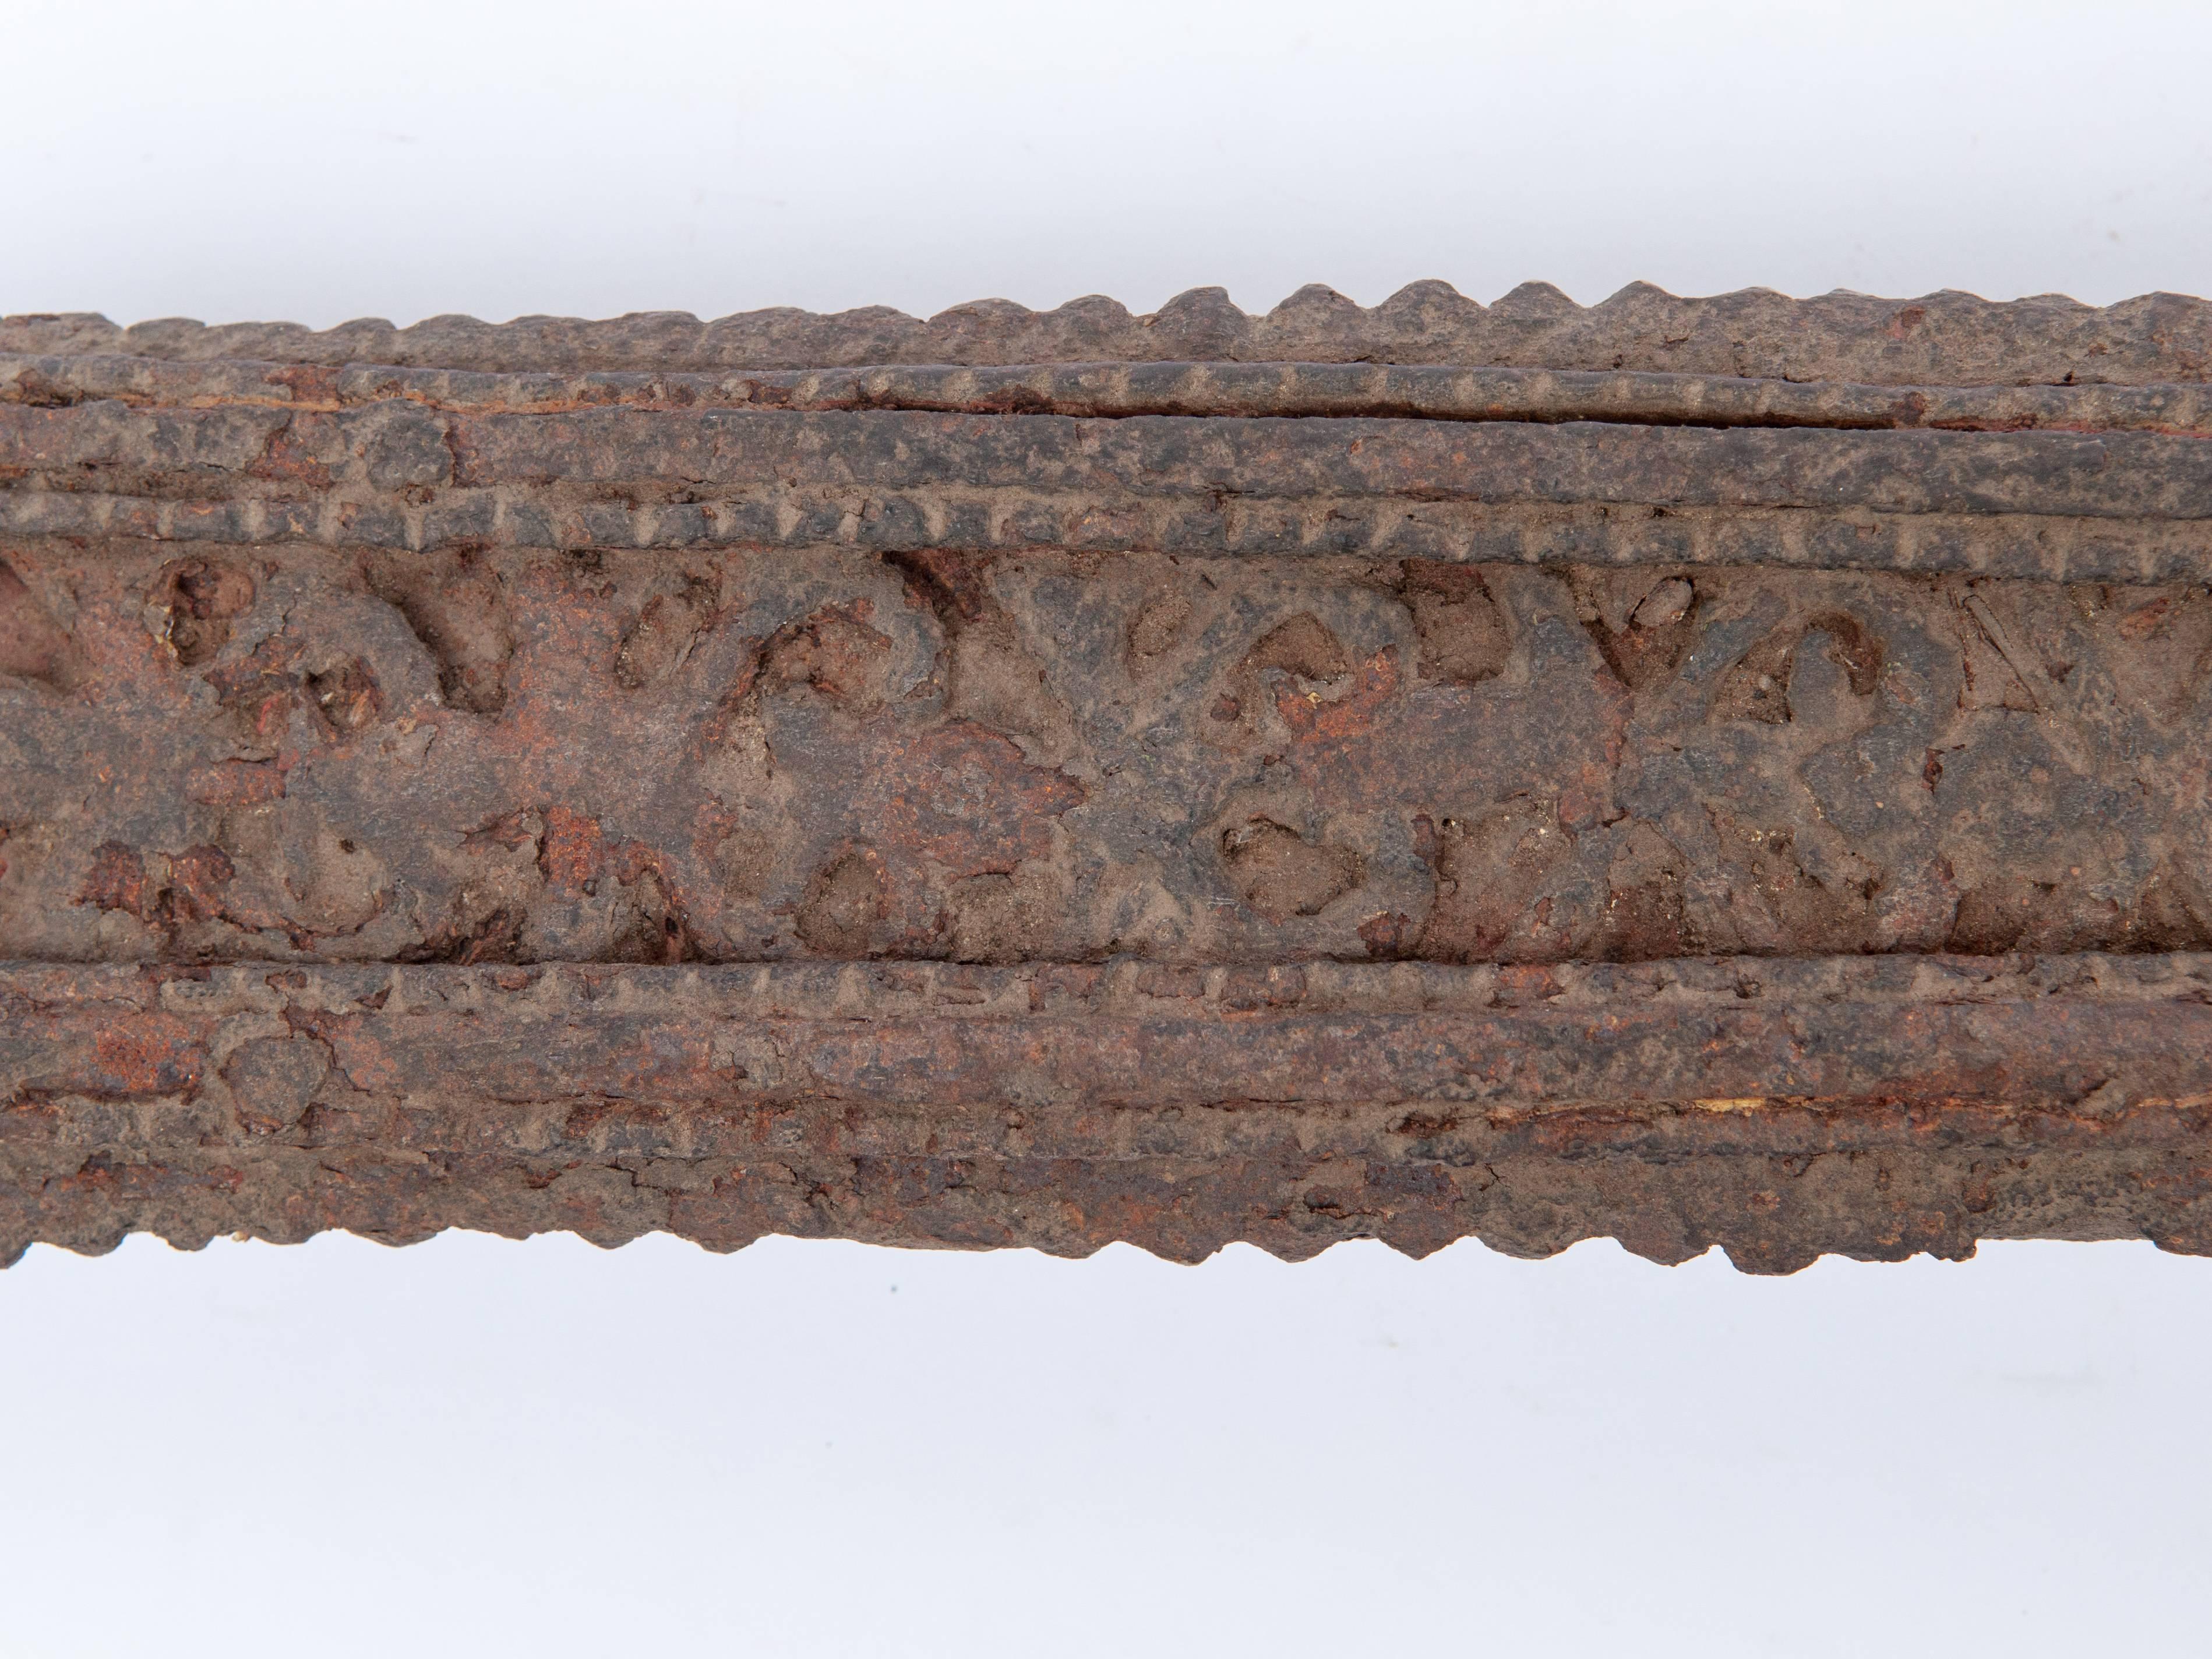 Hand-Crafted Vintage Iron Vegetable Cutter with Bird Motif from Nepal, Early 20th Century